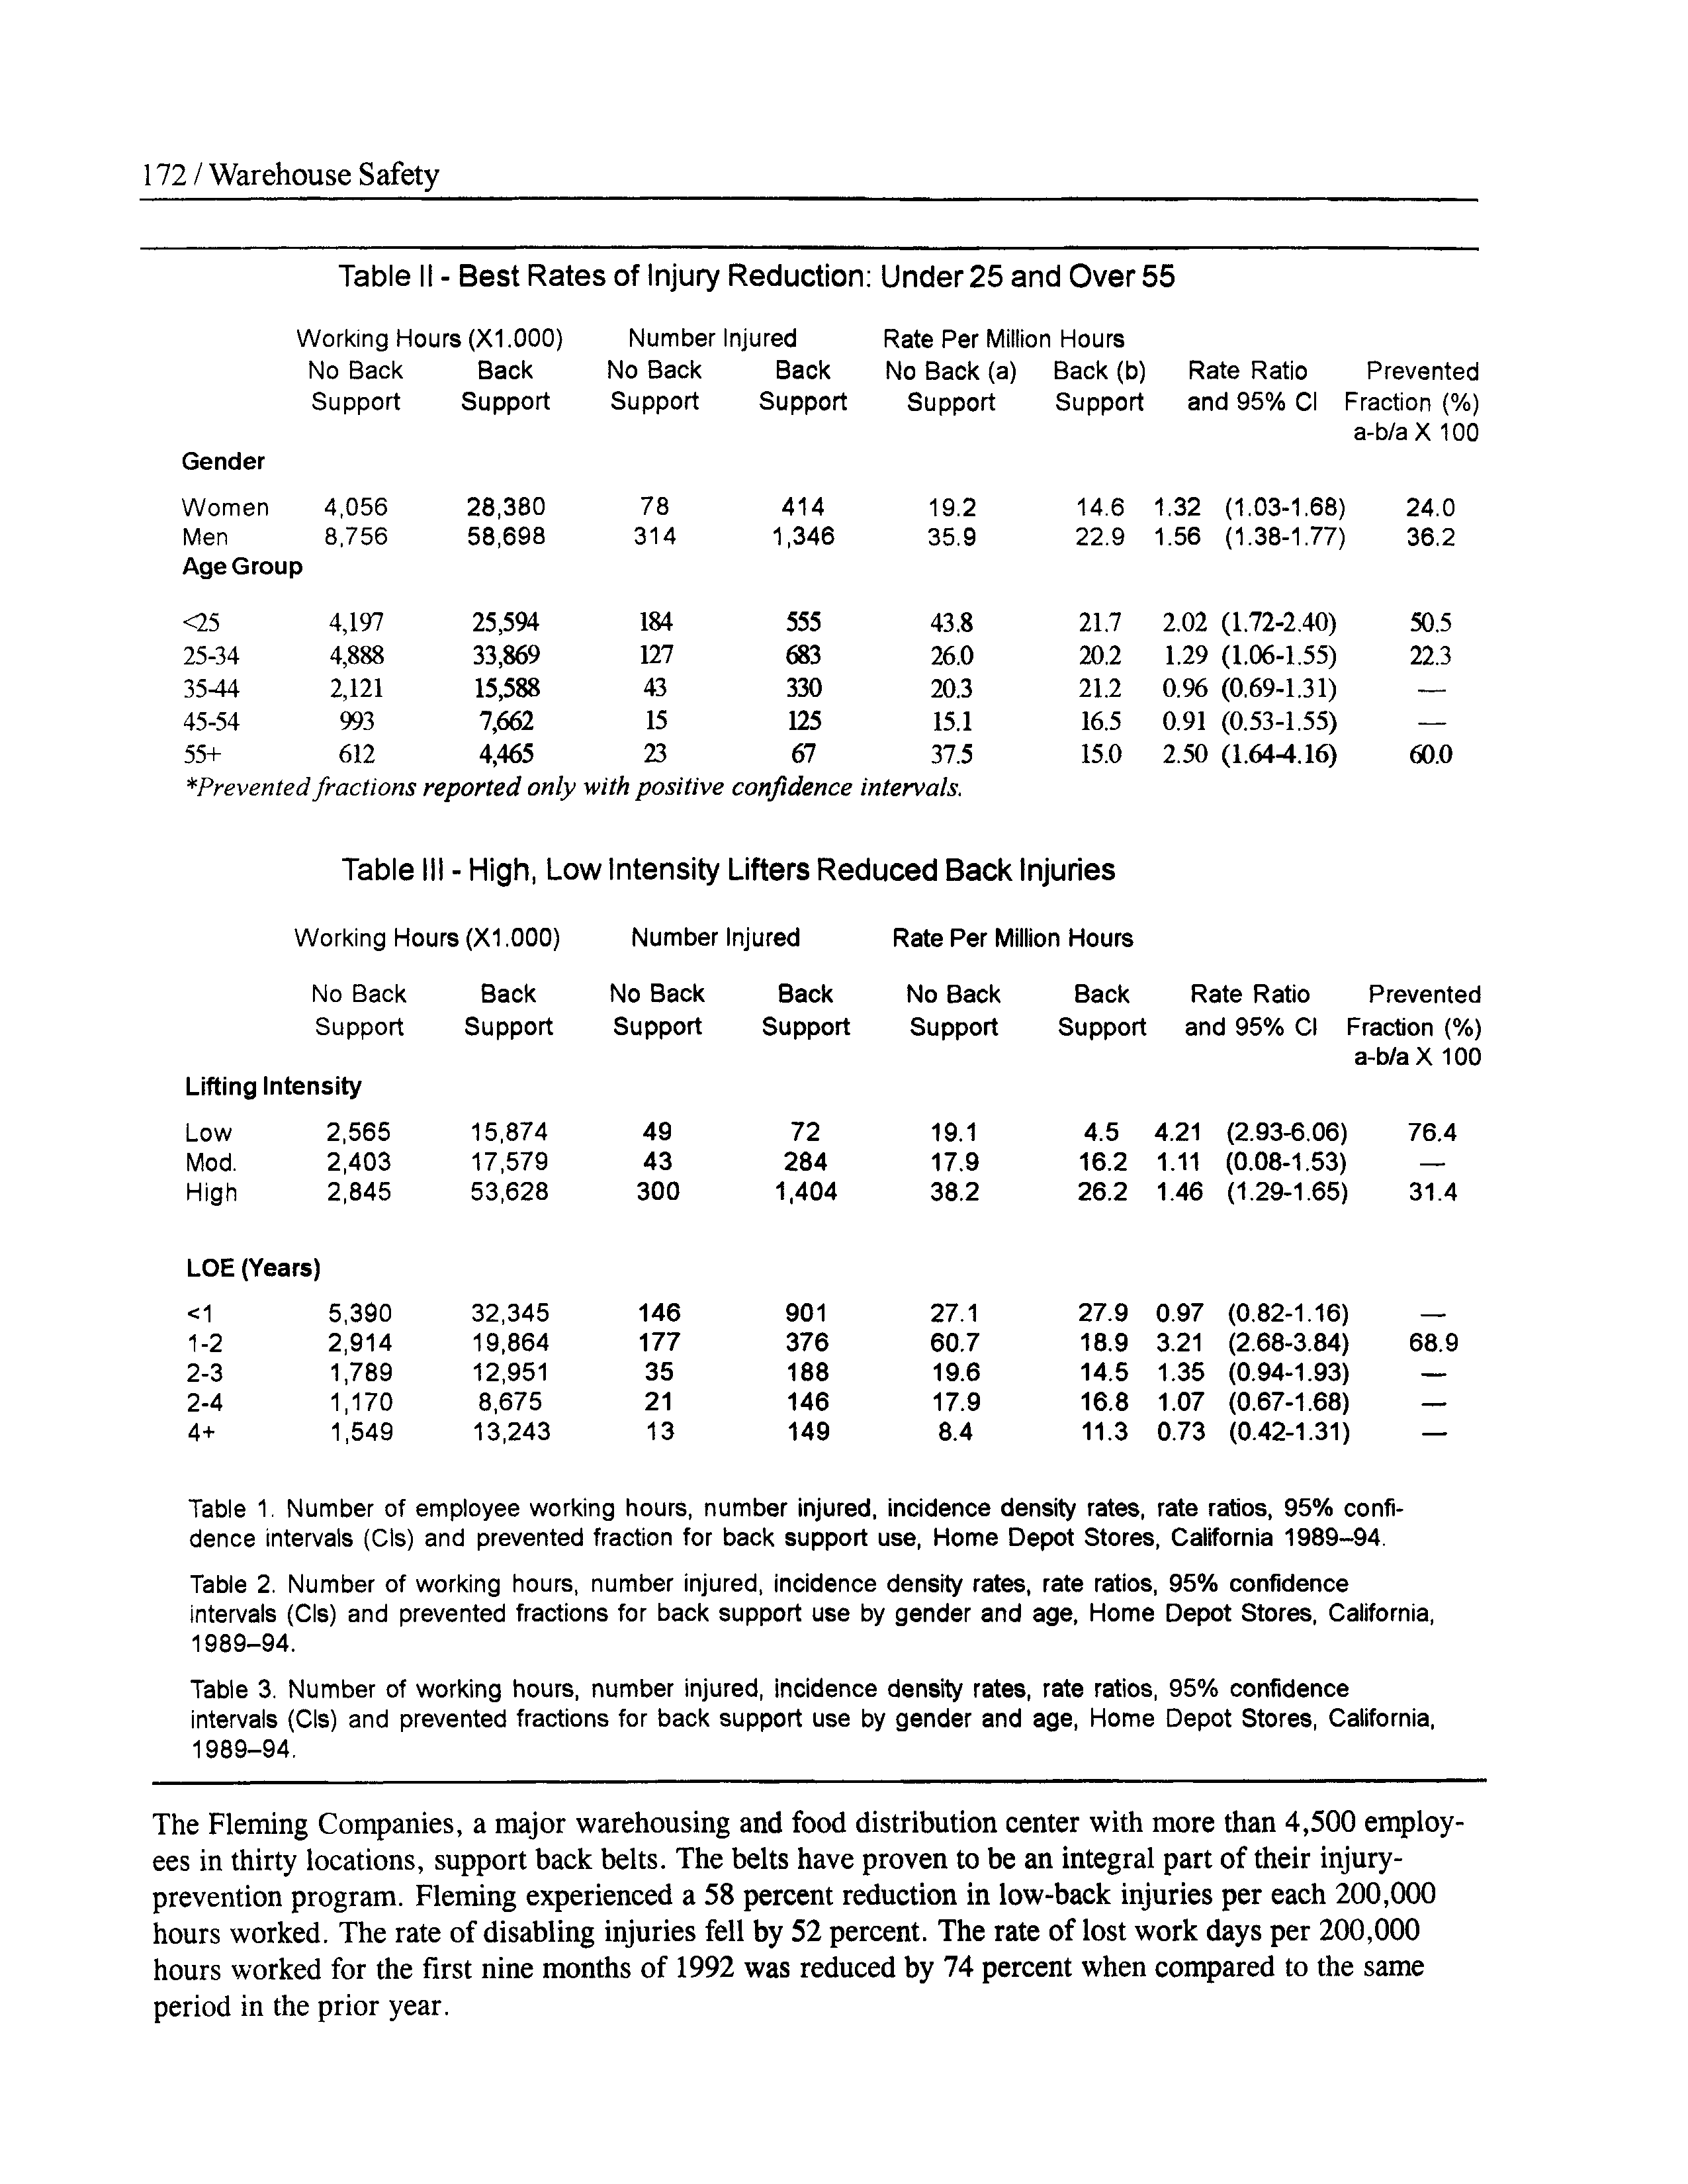 Table 1, Number of employee working hours, number injured, incidence density rates, rate ratios, 95% confidence intervals (CIs) and prevented fraction for back support use, Home Depot Stores, California 1989-94.